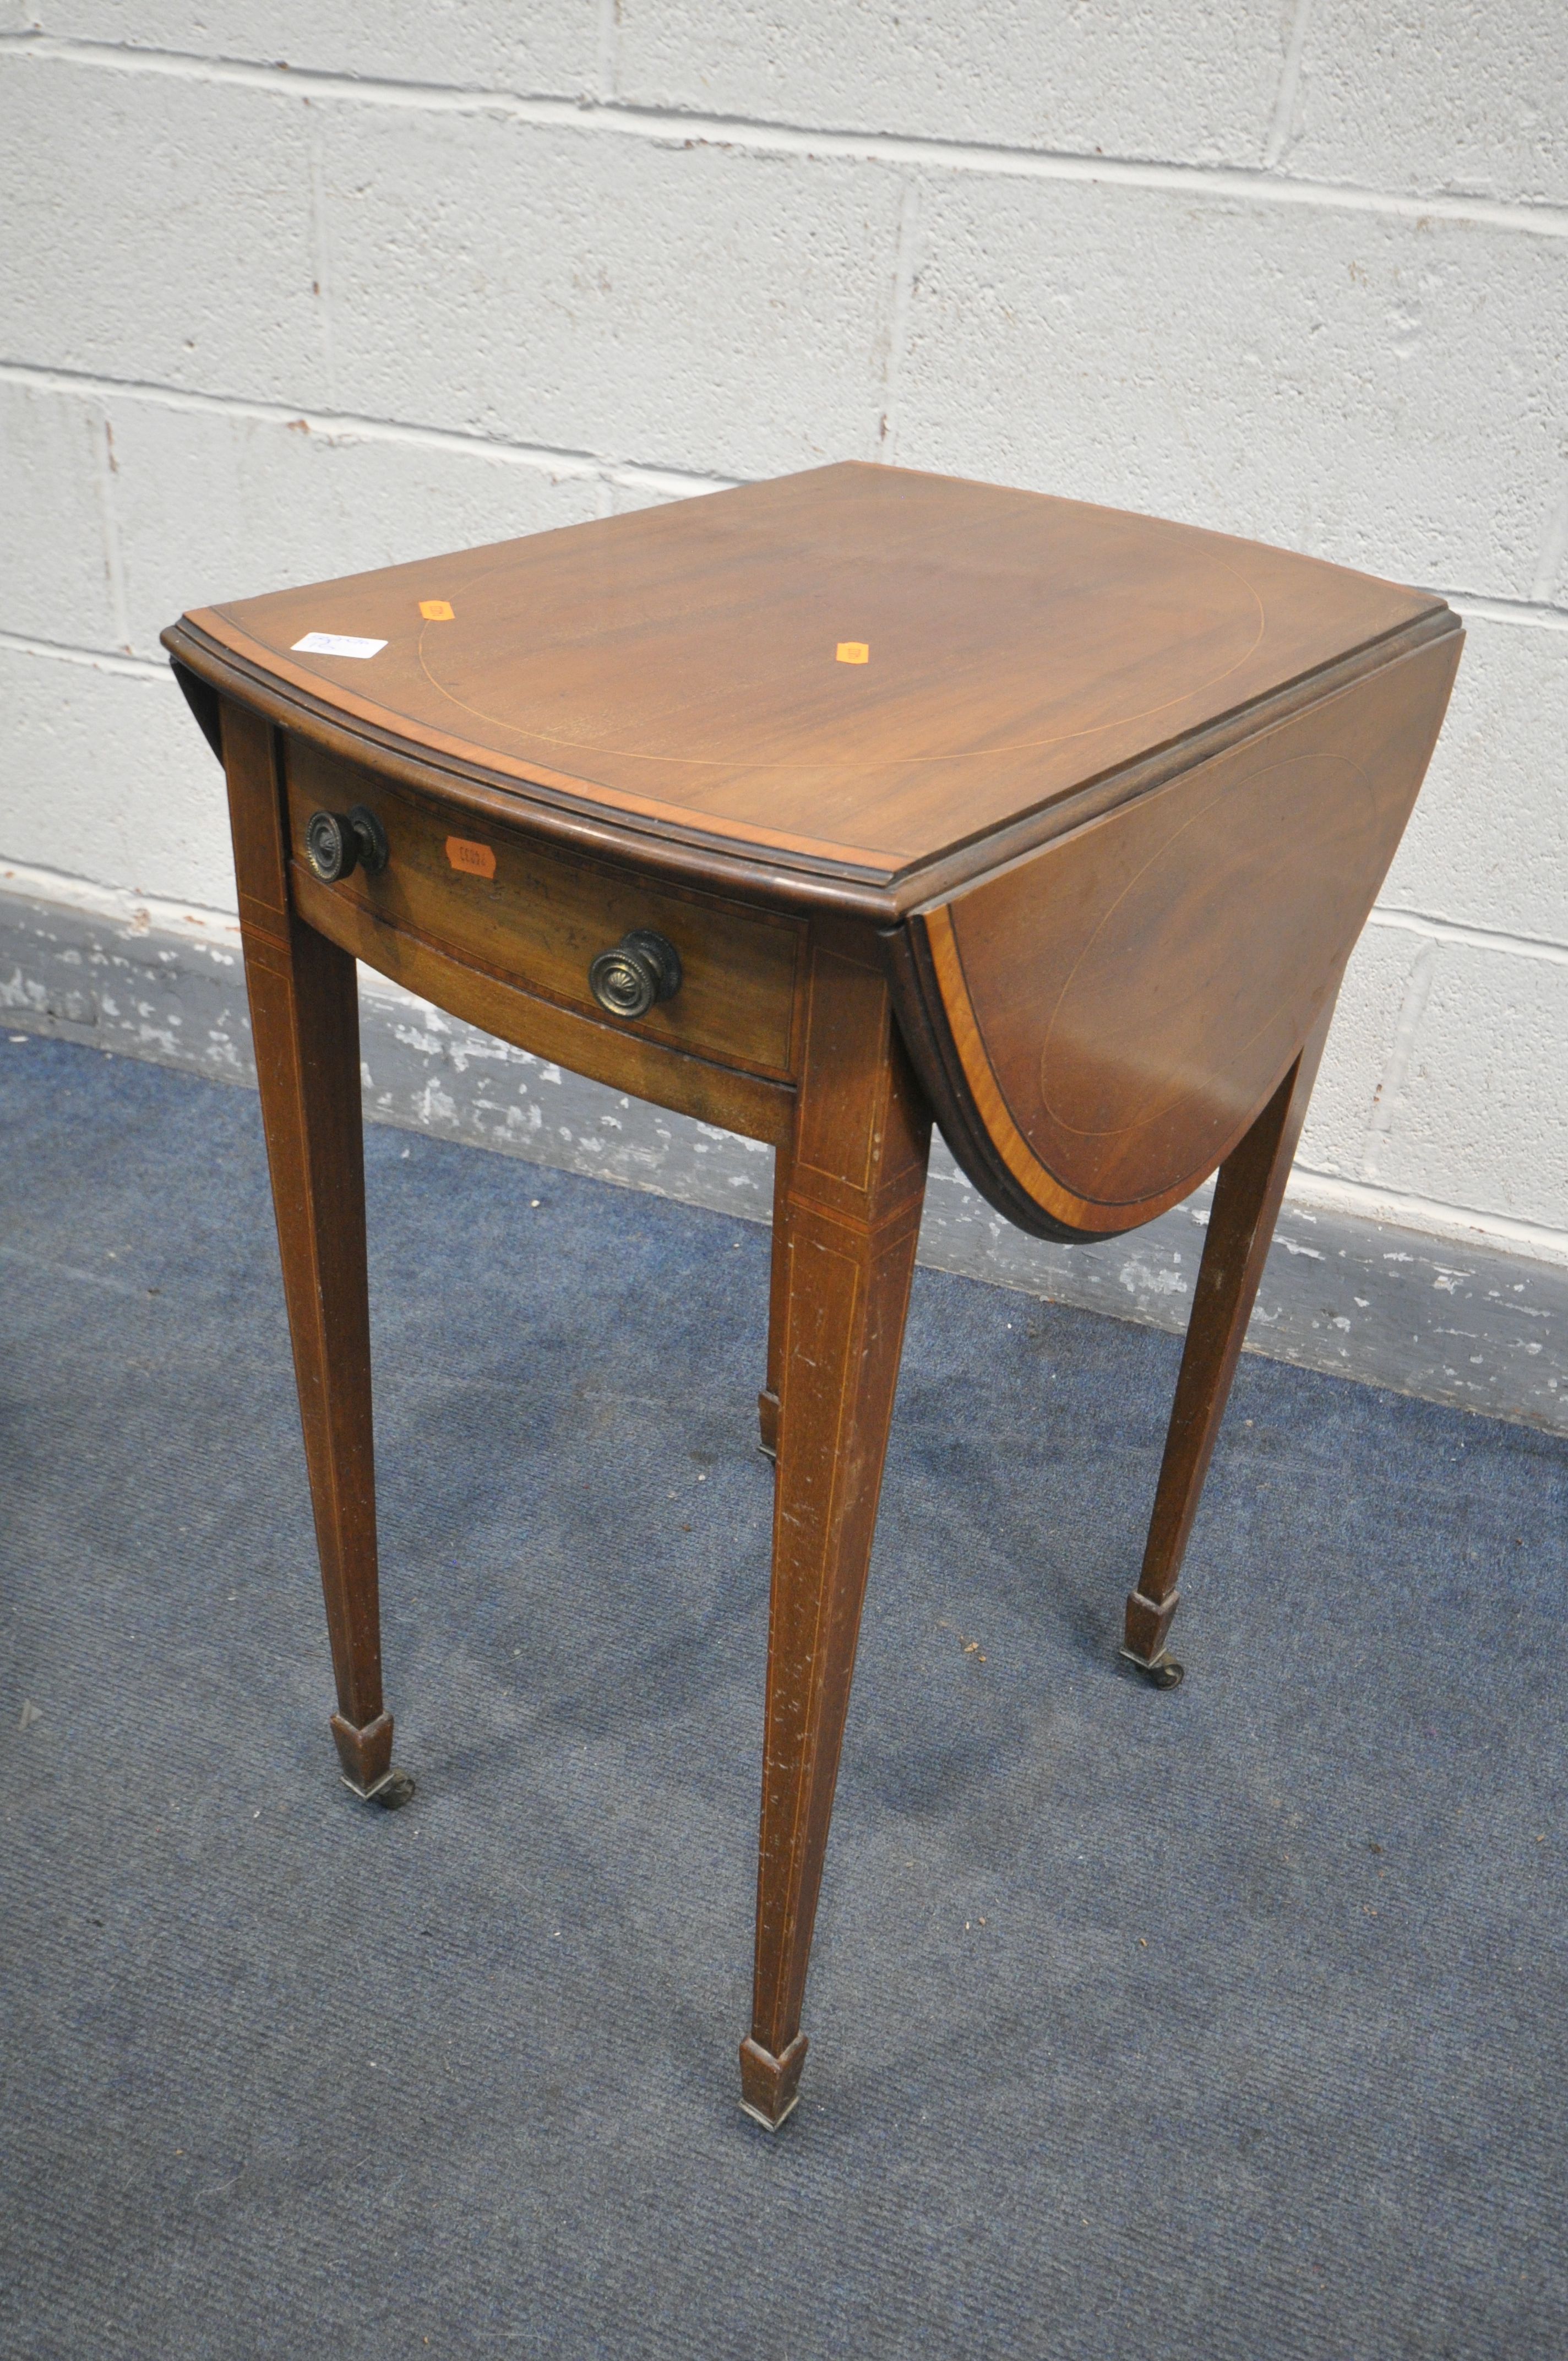 A REGENCY MAHOGANY AND BOXWOOD STRUNG BORDER PEMBROKE TABLE, of small proportions, the oval drop